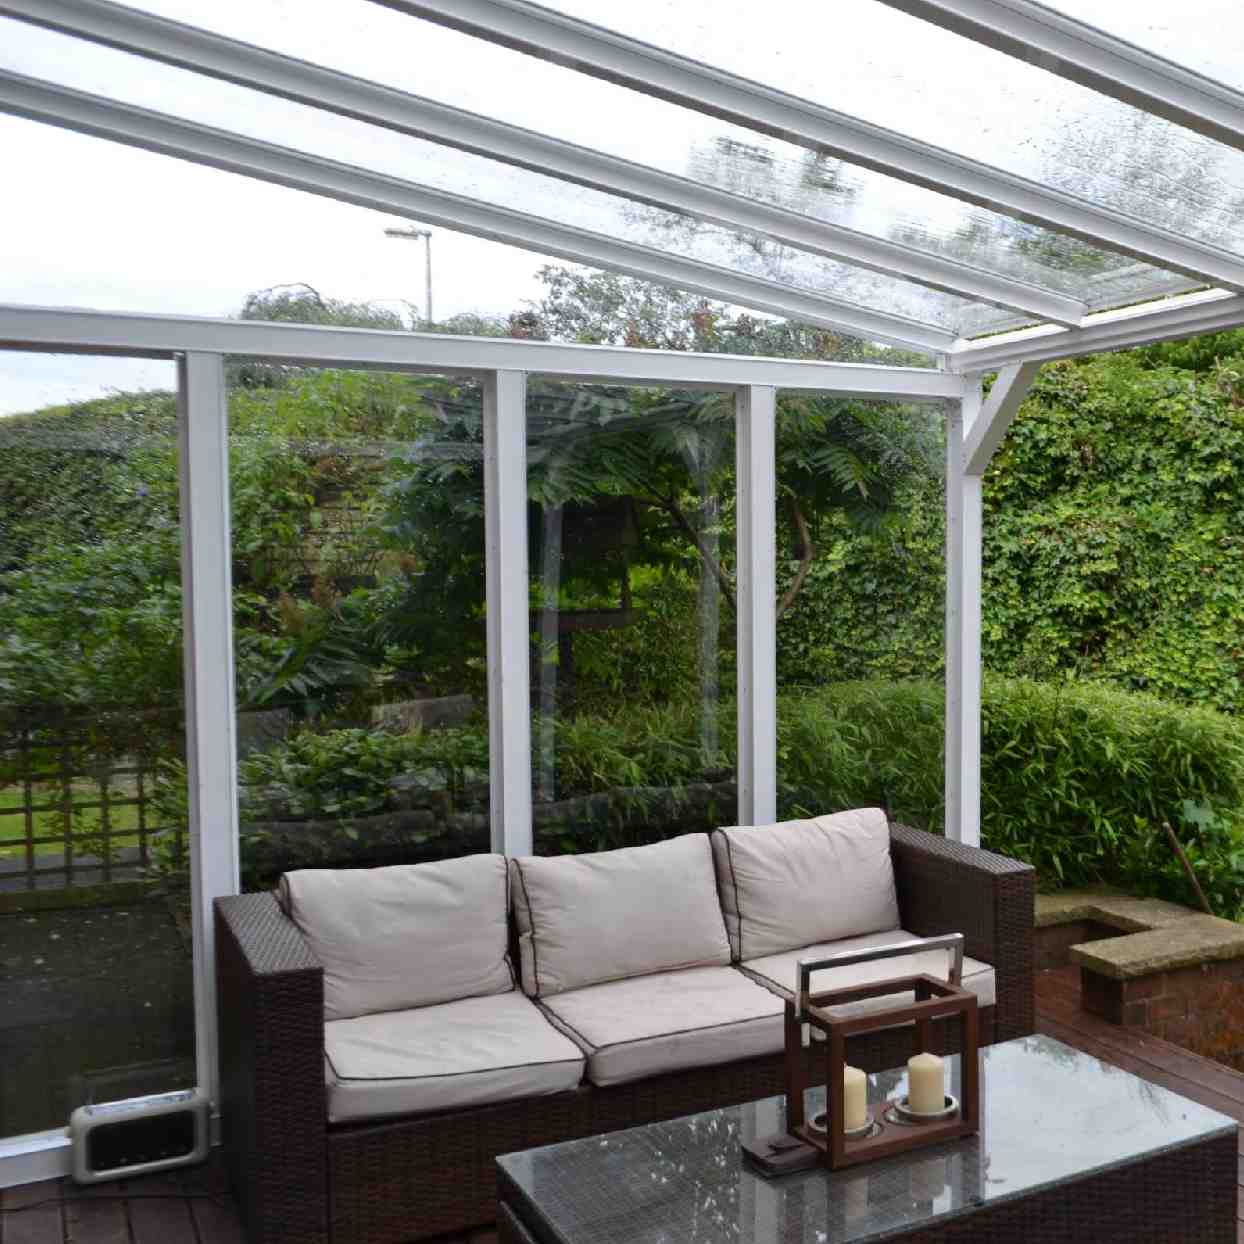 Buy Omega Verandah White with 16mm Polycarbonate Glazing - 3.1m (W) x 2.5m (P), (2) Supporting Posts online today